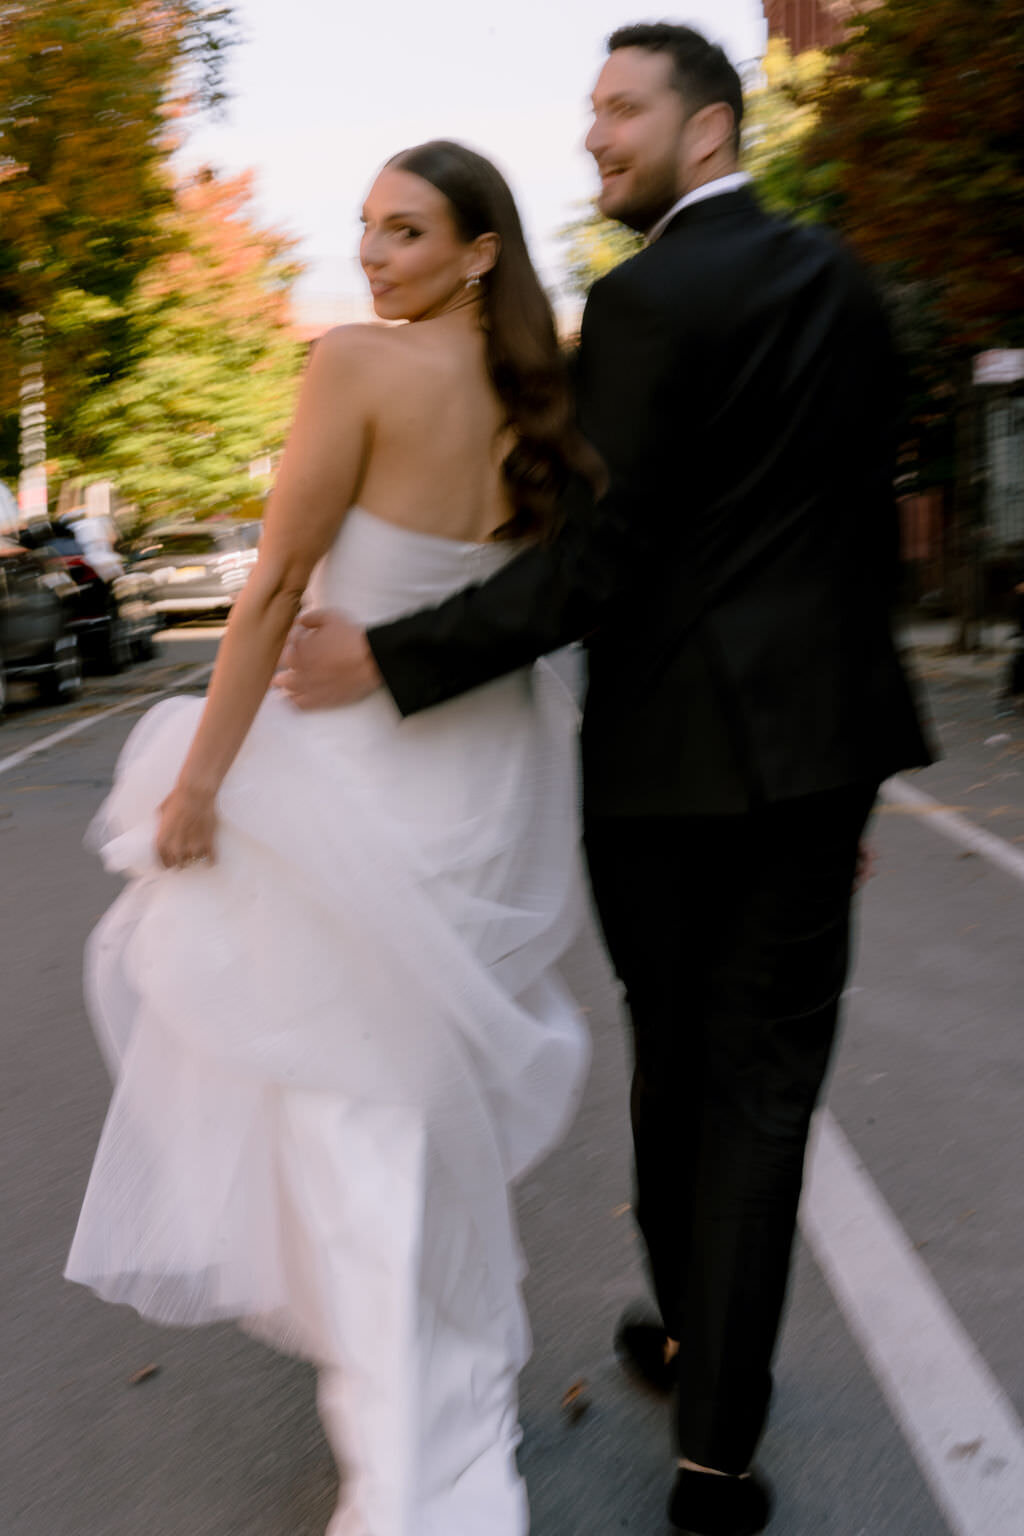 blurred photo of bride and groom walking down a street while looking over their shoulders